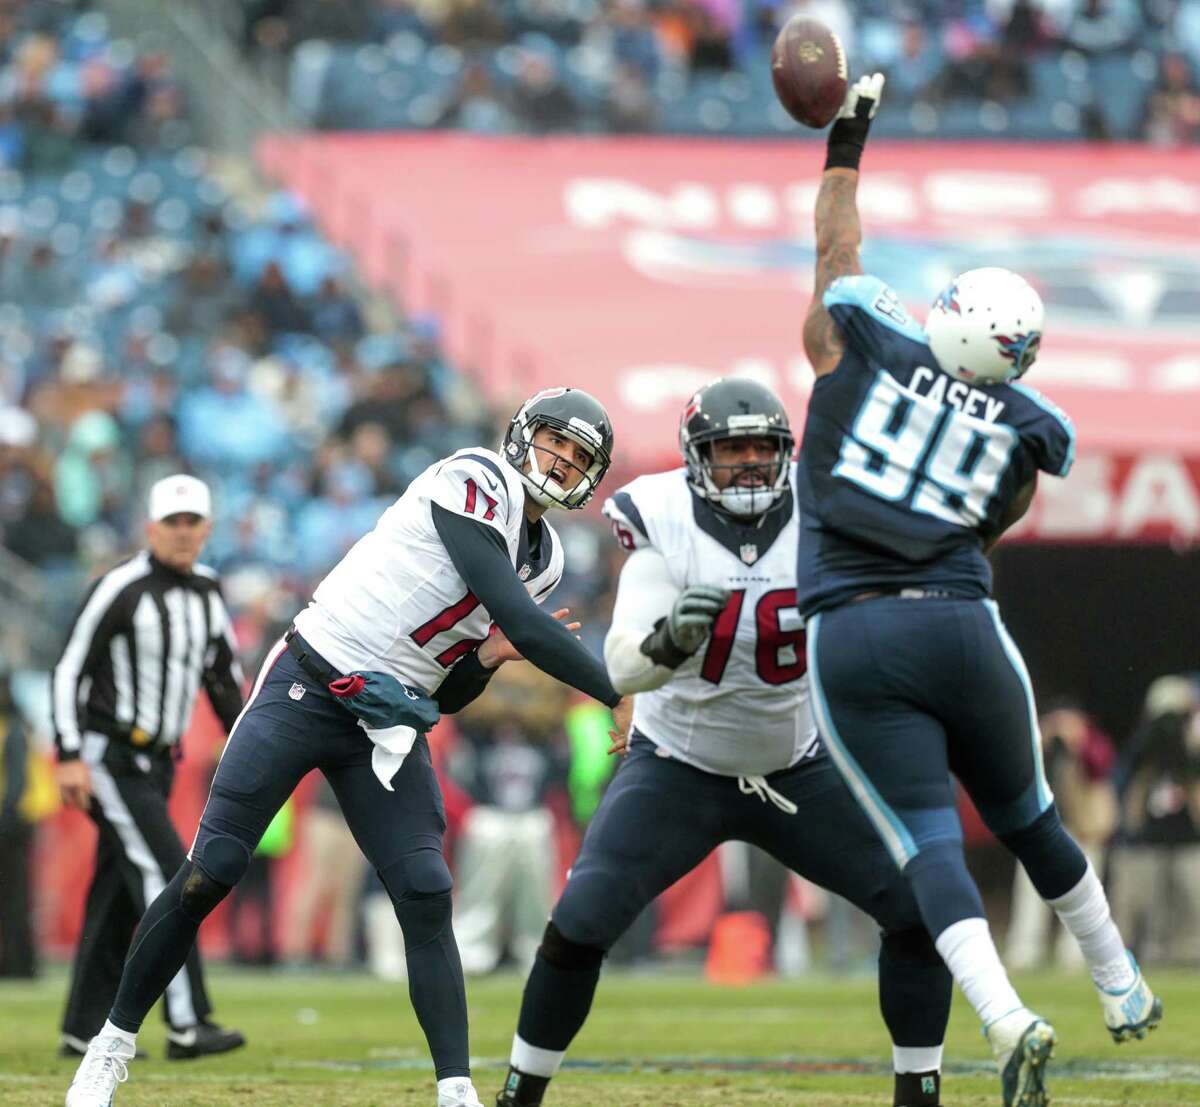 Titans tackle Jurrell Casey (99) deflects a pass by quarterback Brock Osweiler during the second quarter of the Texans' loss.